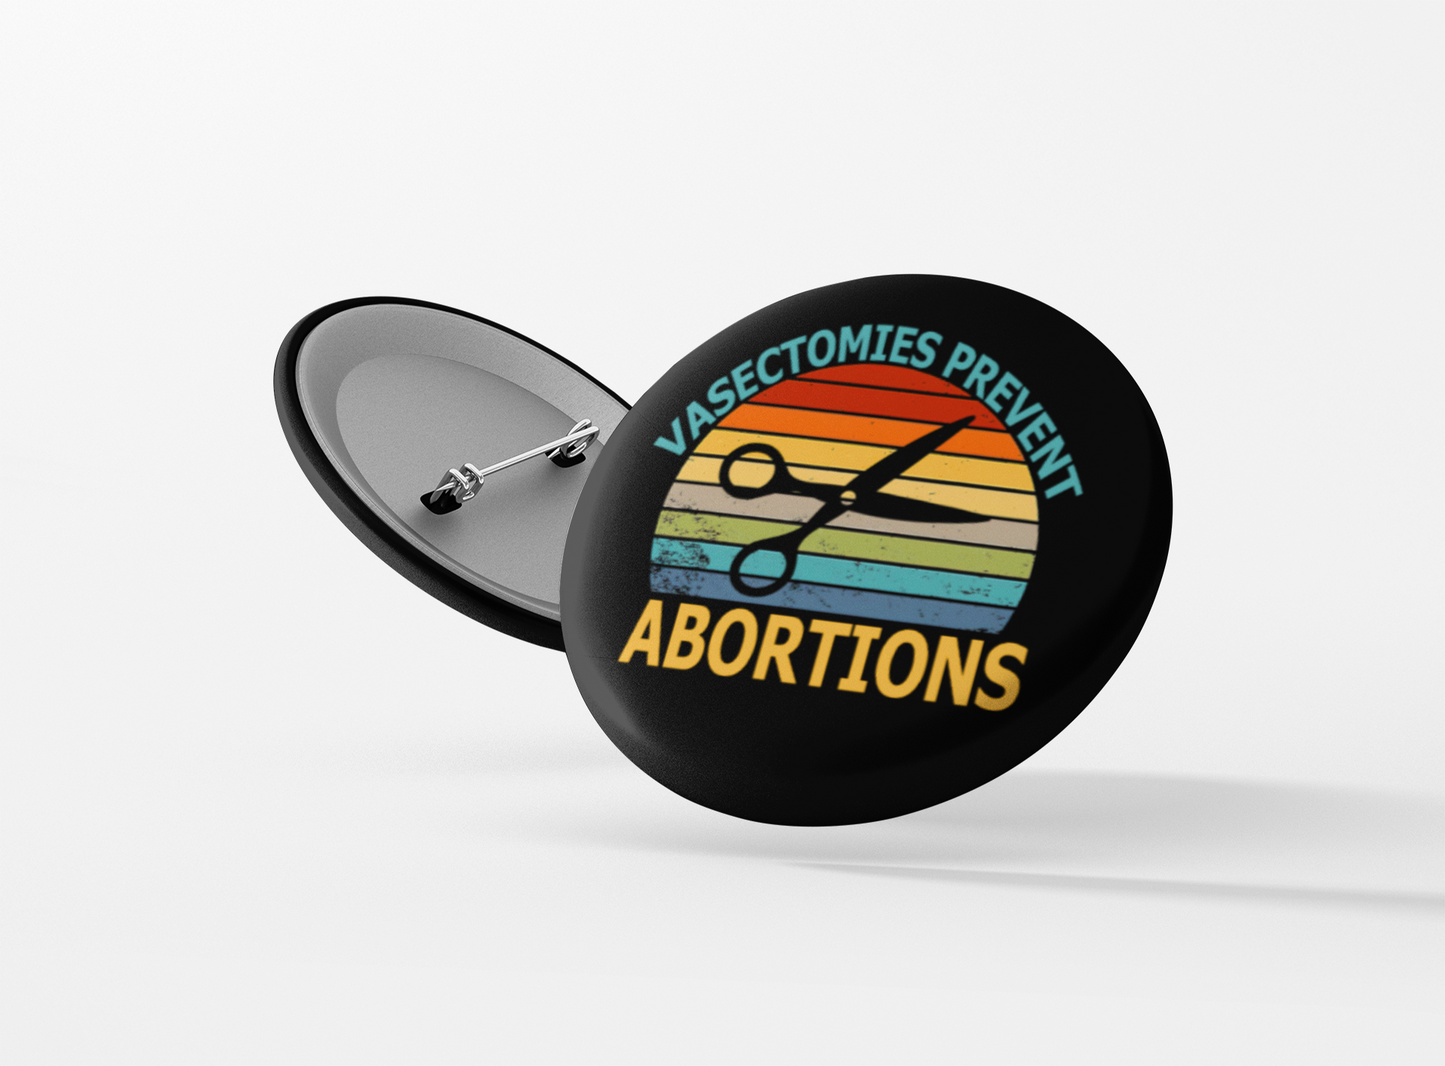 Vasectomies Prevent Abortions Pinback Button